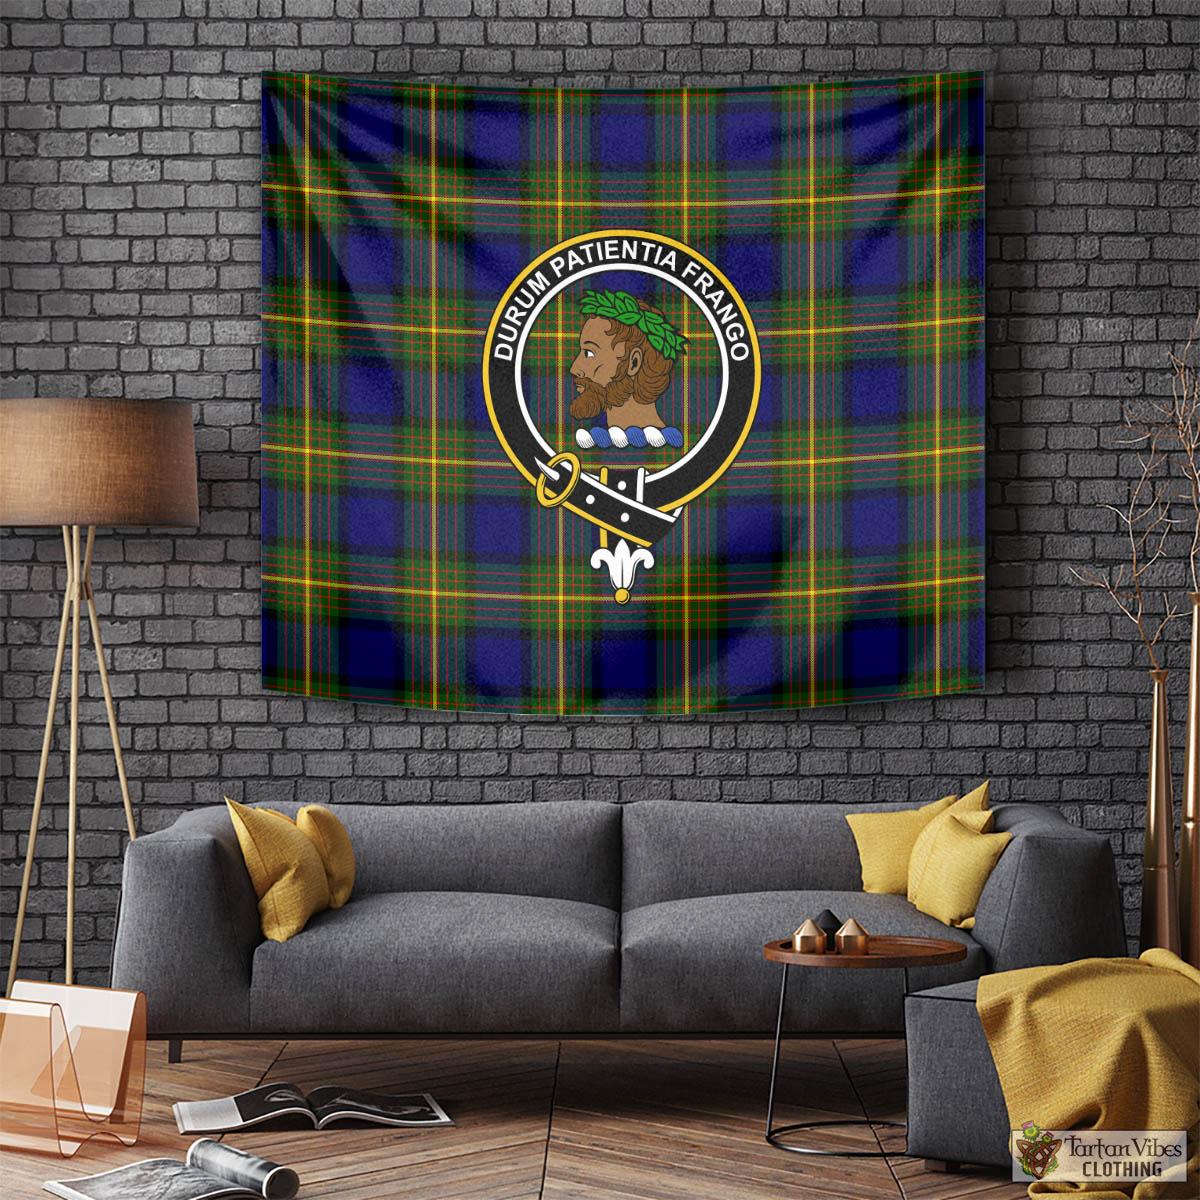 Tartan Vibes Clothing Moore Tartan Tapestry Wall Hanging and Home Decor for Room with Family Crest